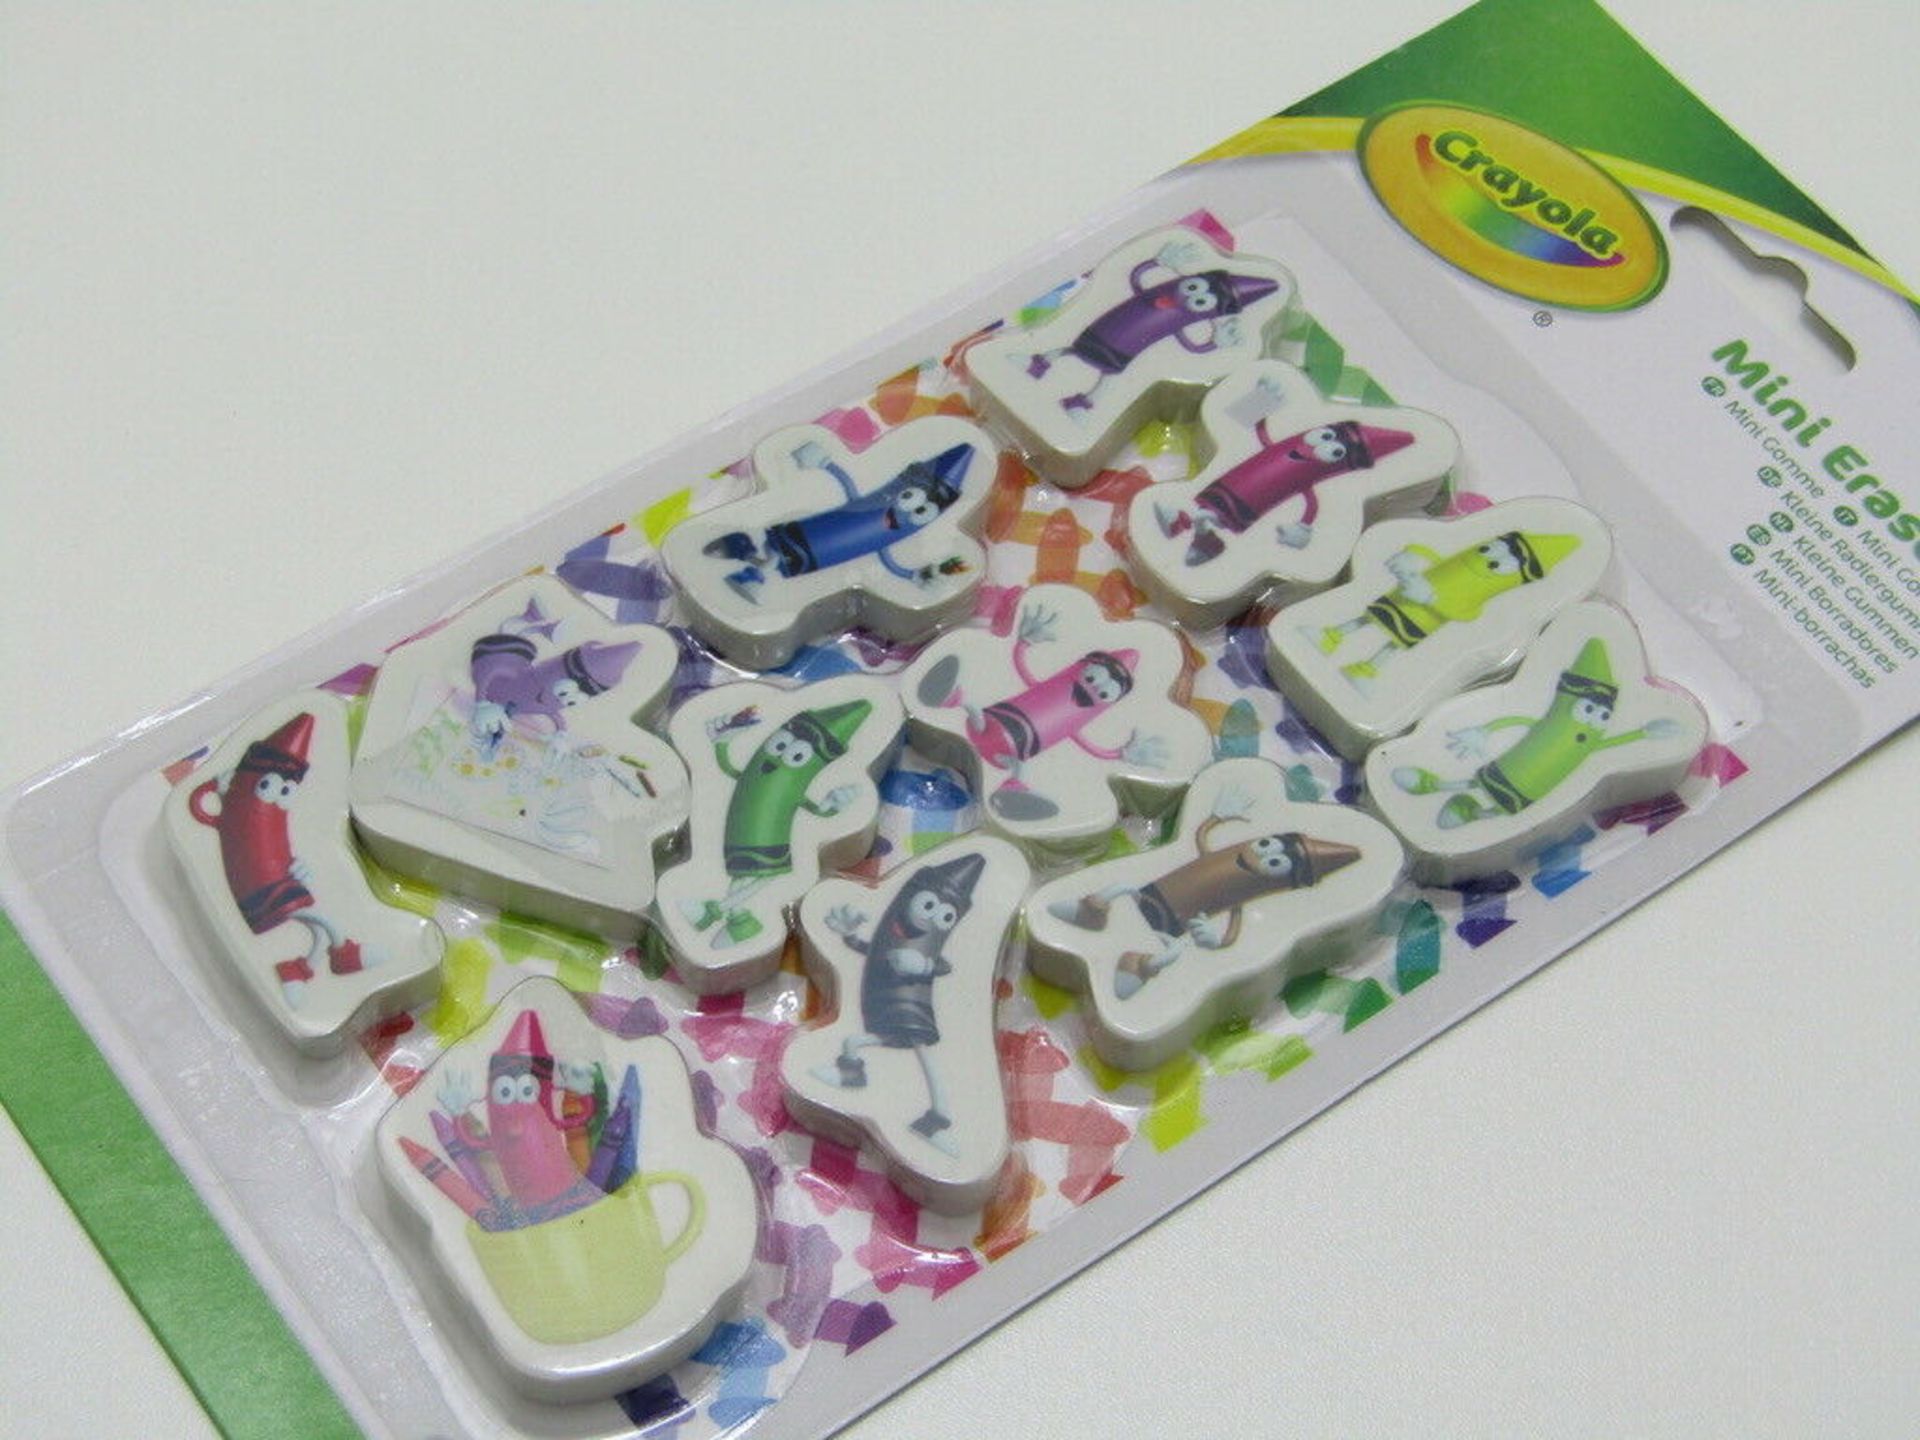 20 x CRAYOLA pack of 12 Mini Erasers. no vat on hammer.You will get 20 packs of 12 erasers.Crayola